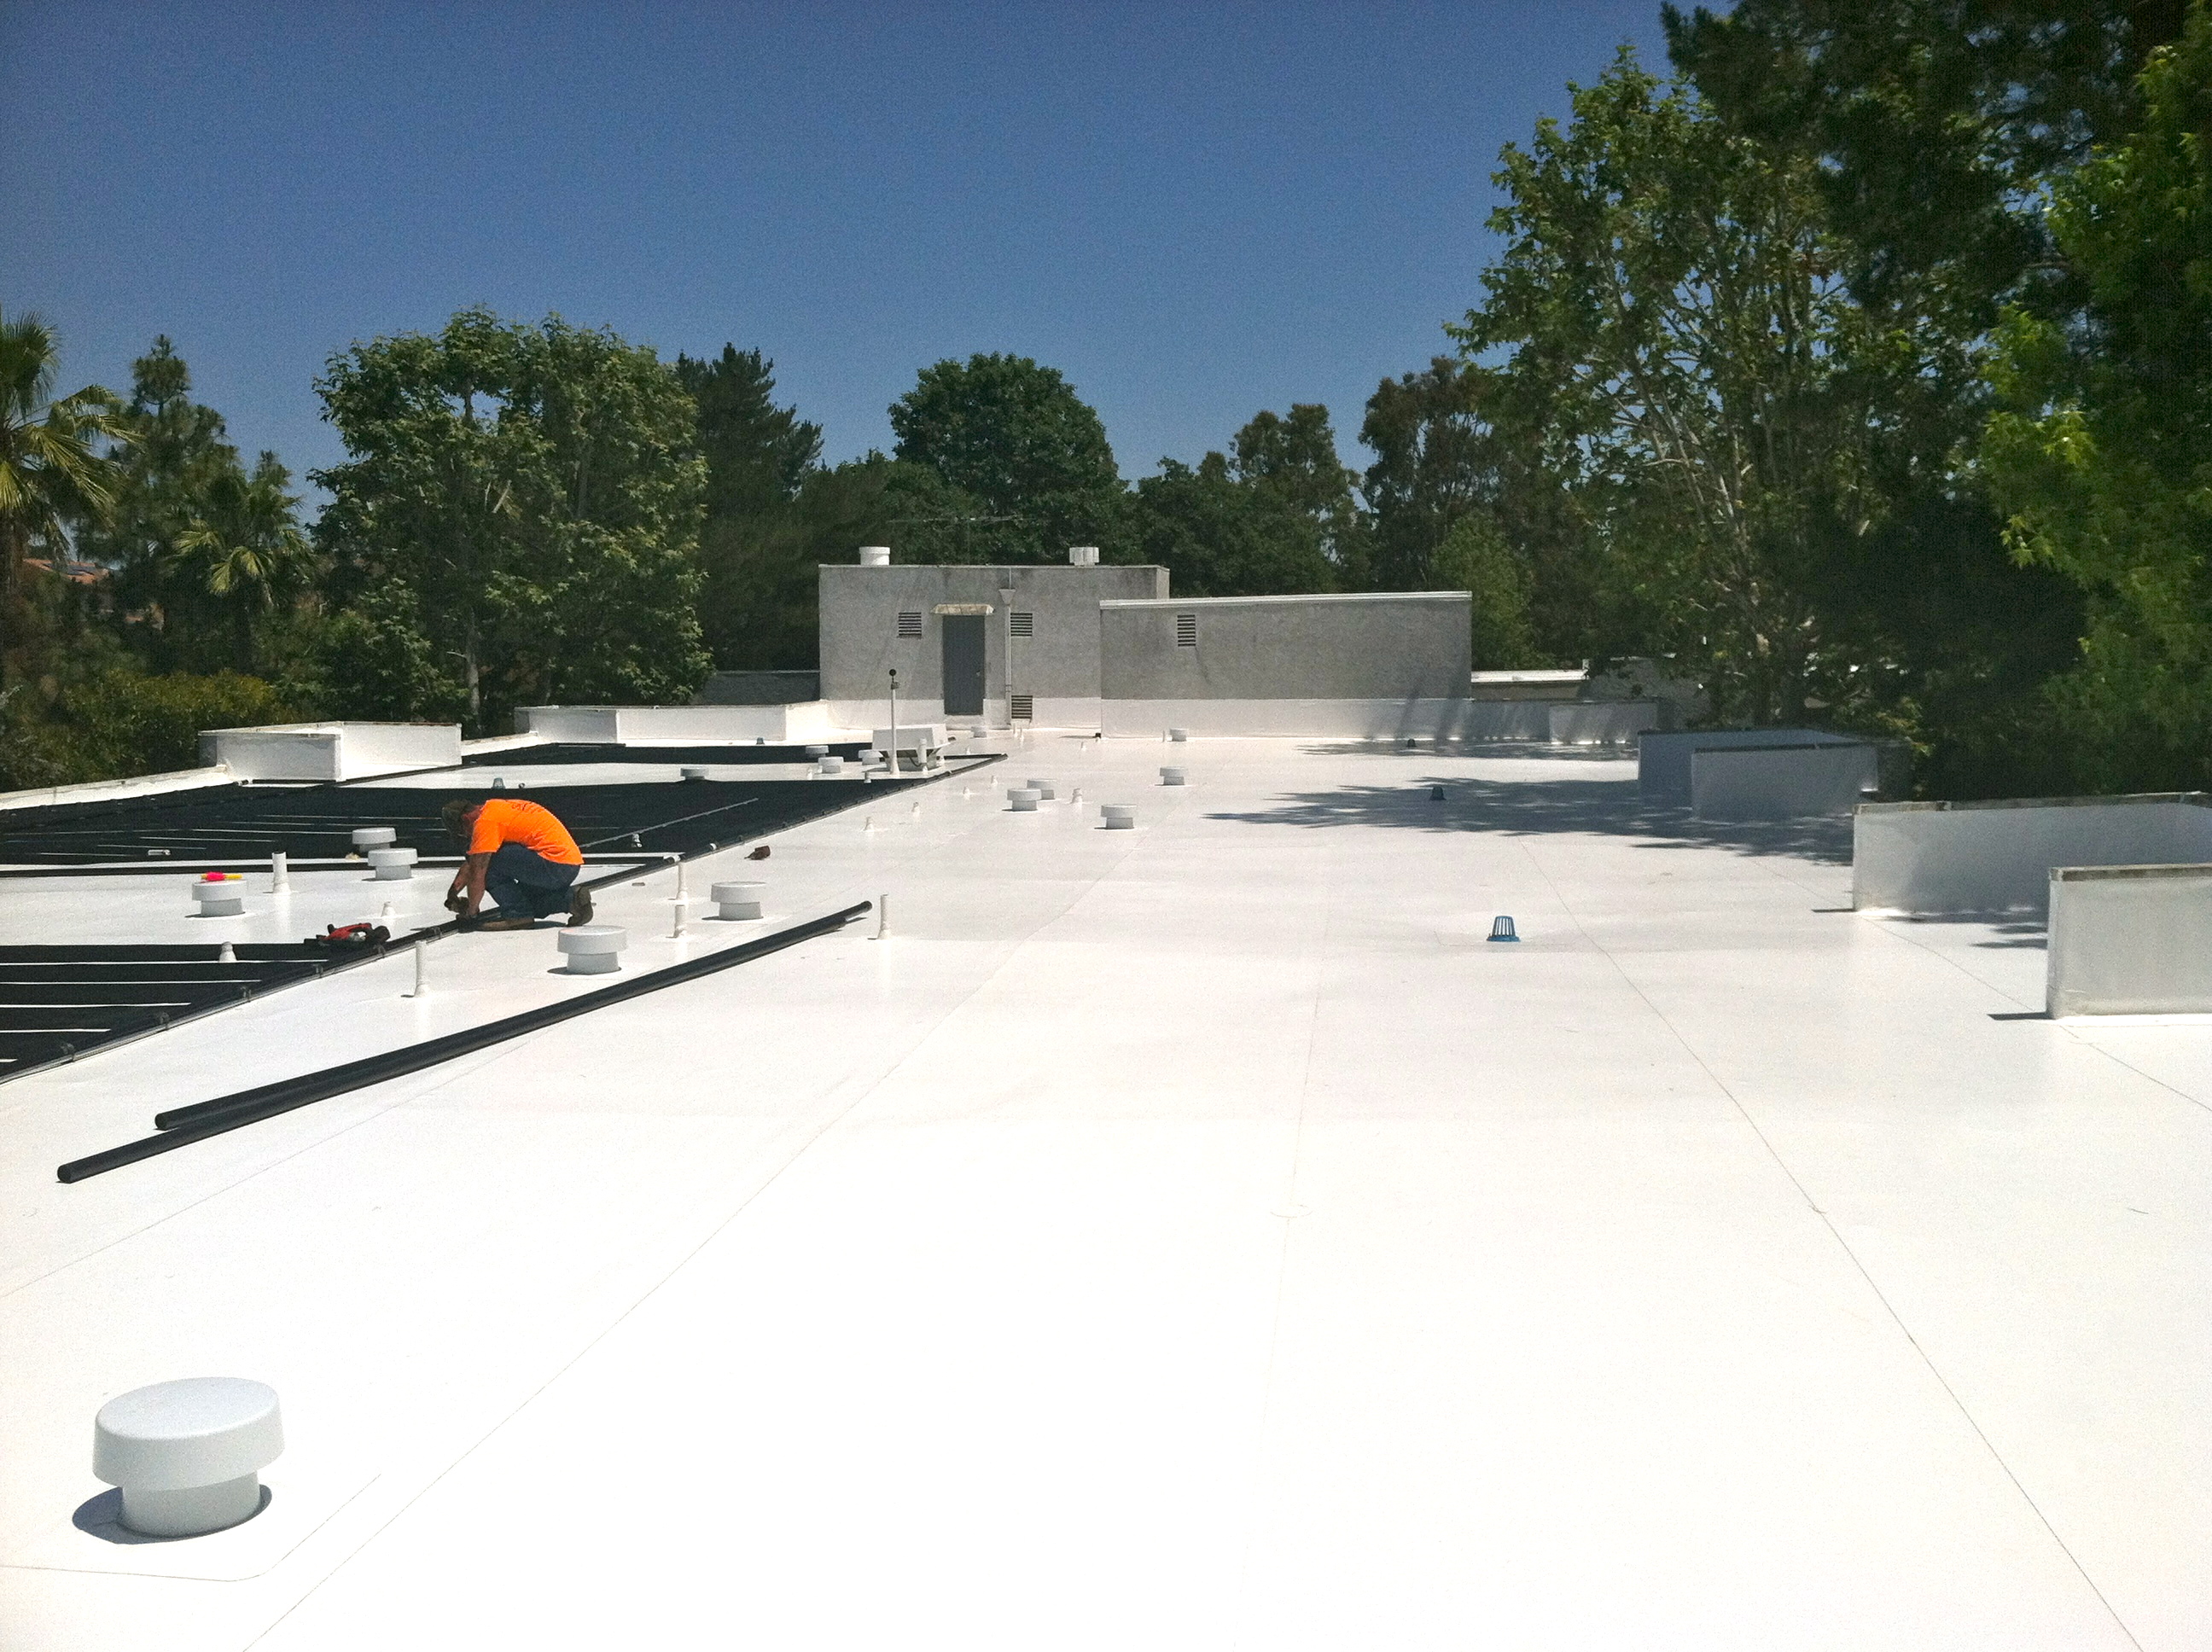 IB Roof System installed by Chandler's Roofing on The Estates Condominiums in Rancho Palos Verdes, CA.